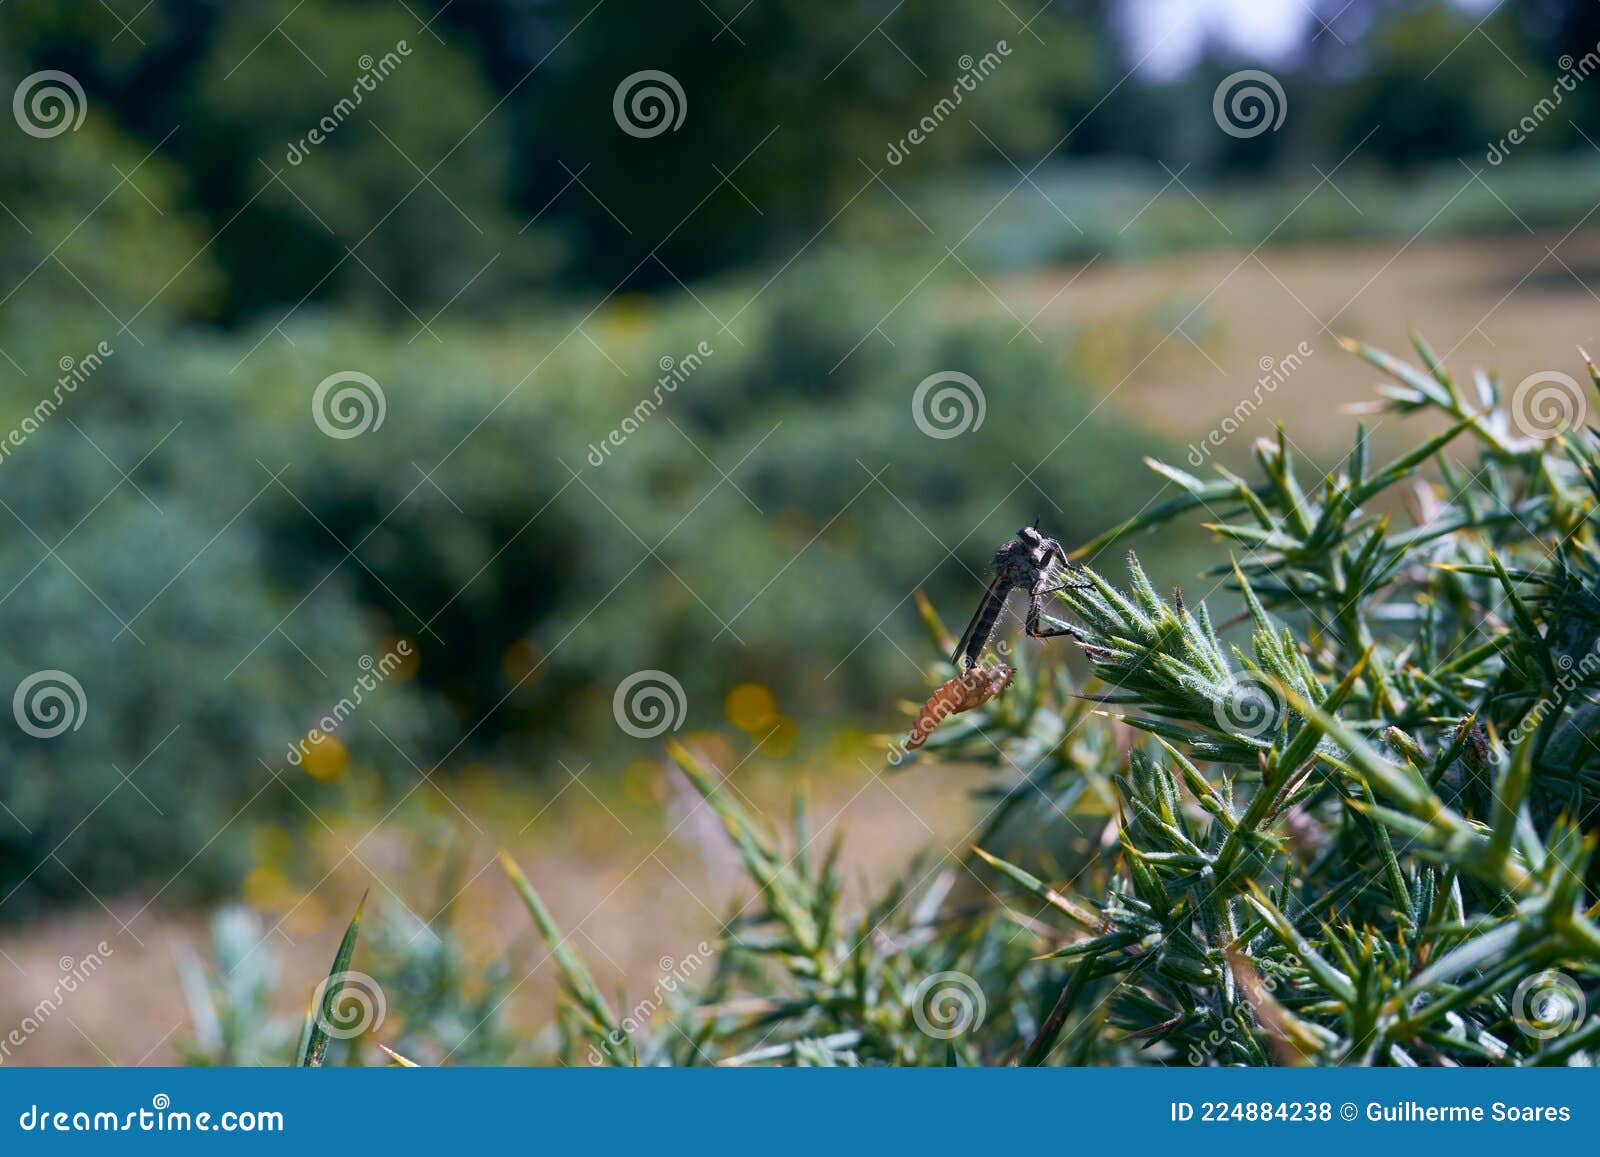 robber fly insect after eclosion perched on plant